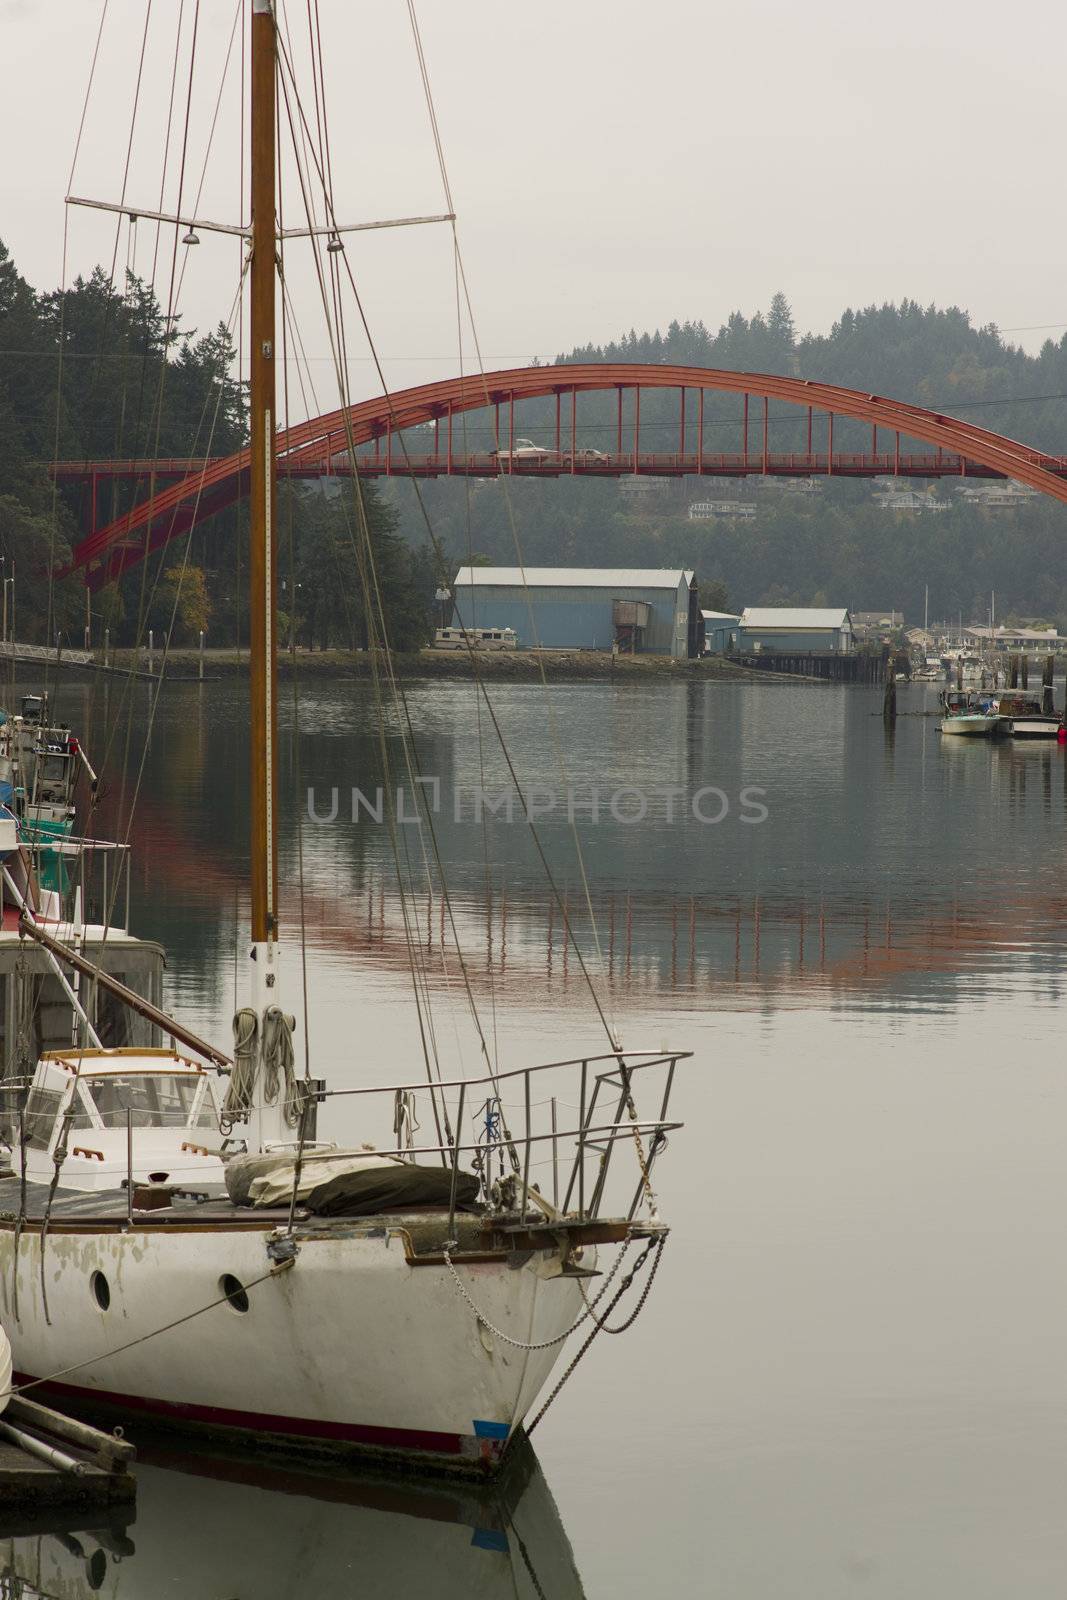 Bridge and Sailboat by ChrisBoswell